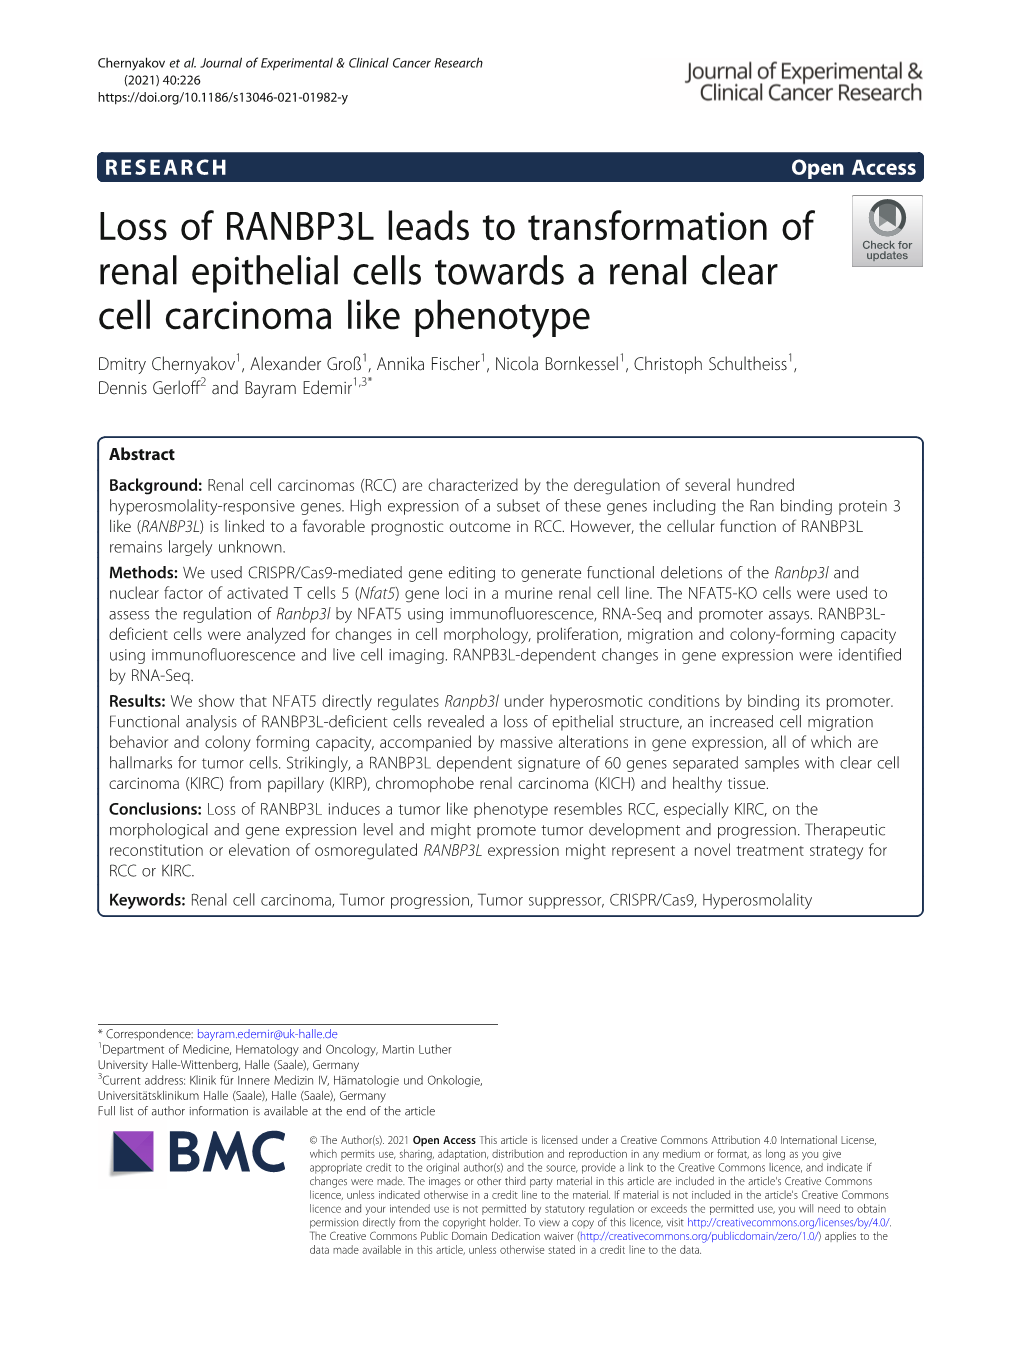 Loss of RANBP3L Leads to Transformation of Renal Epithelial